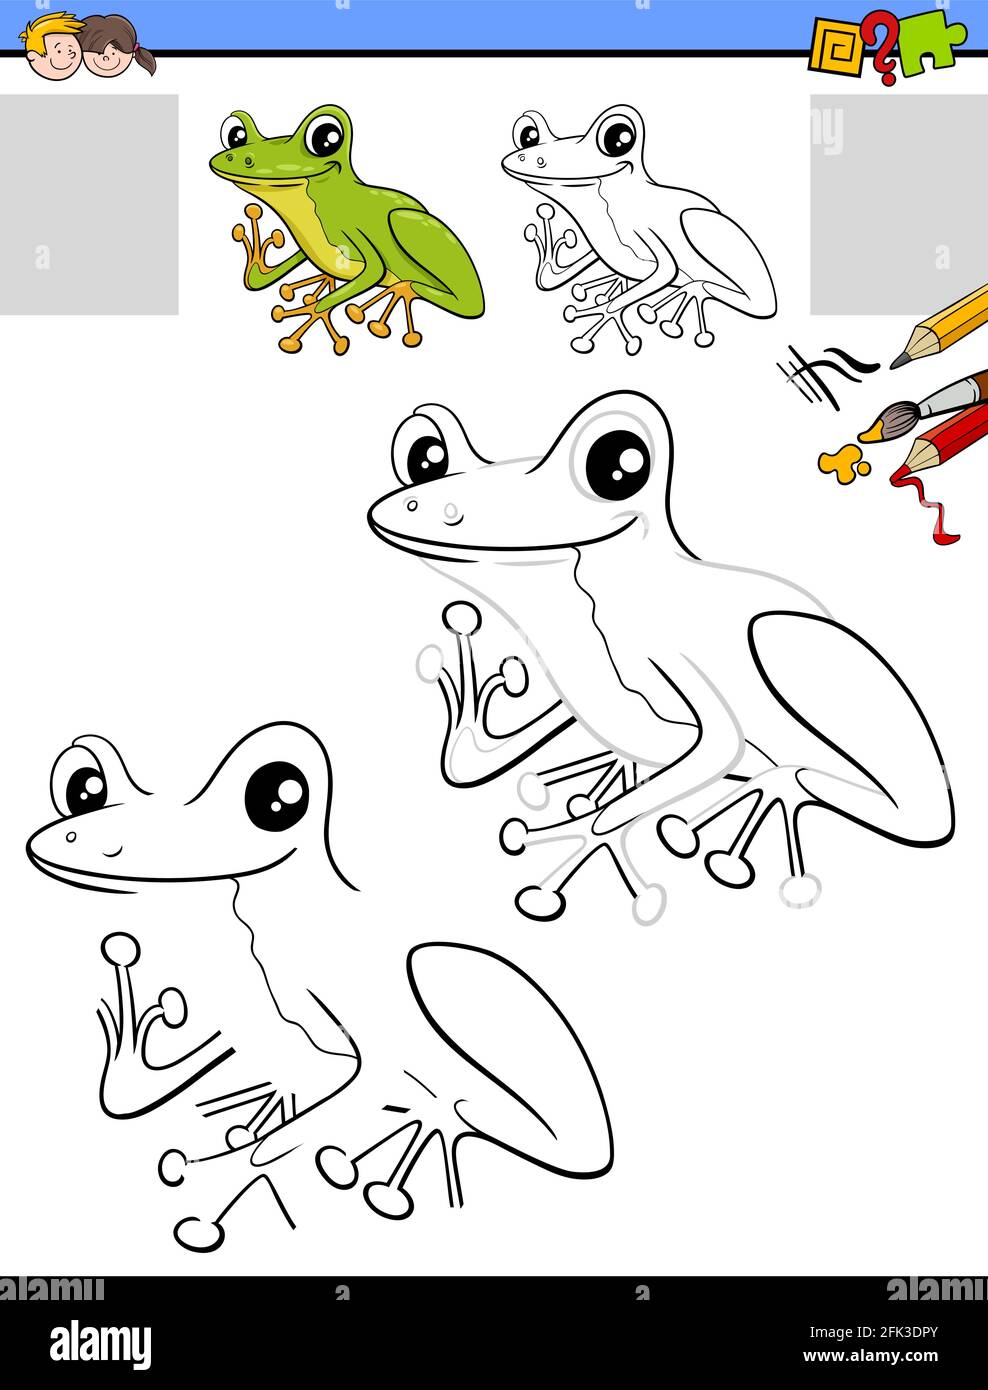 Drawing and coloring task with tree frog character stock vector image art